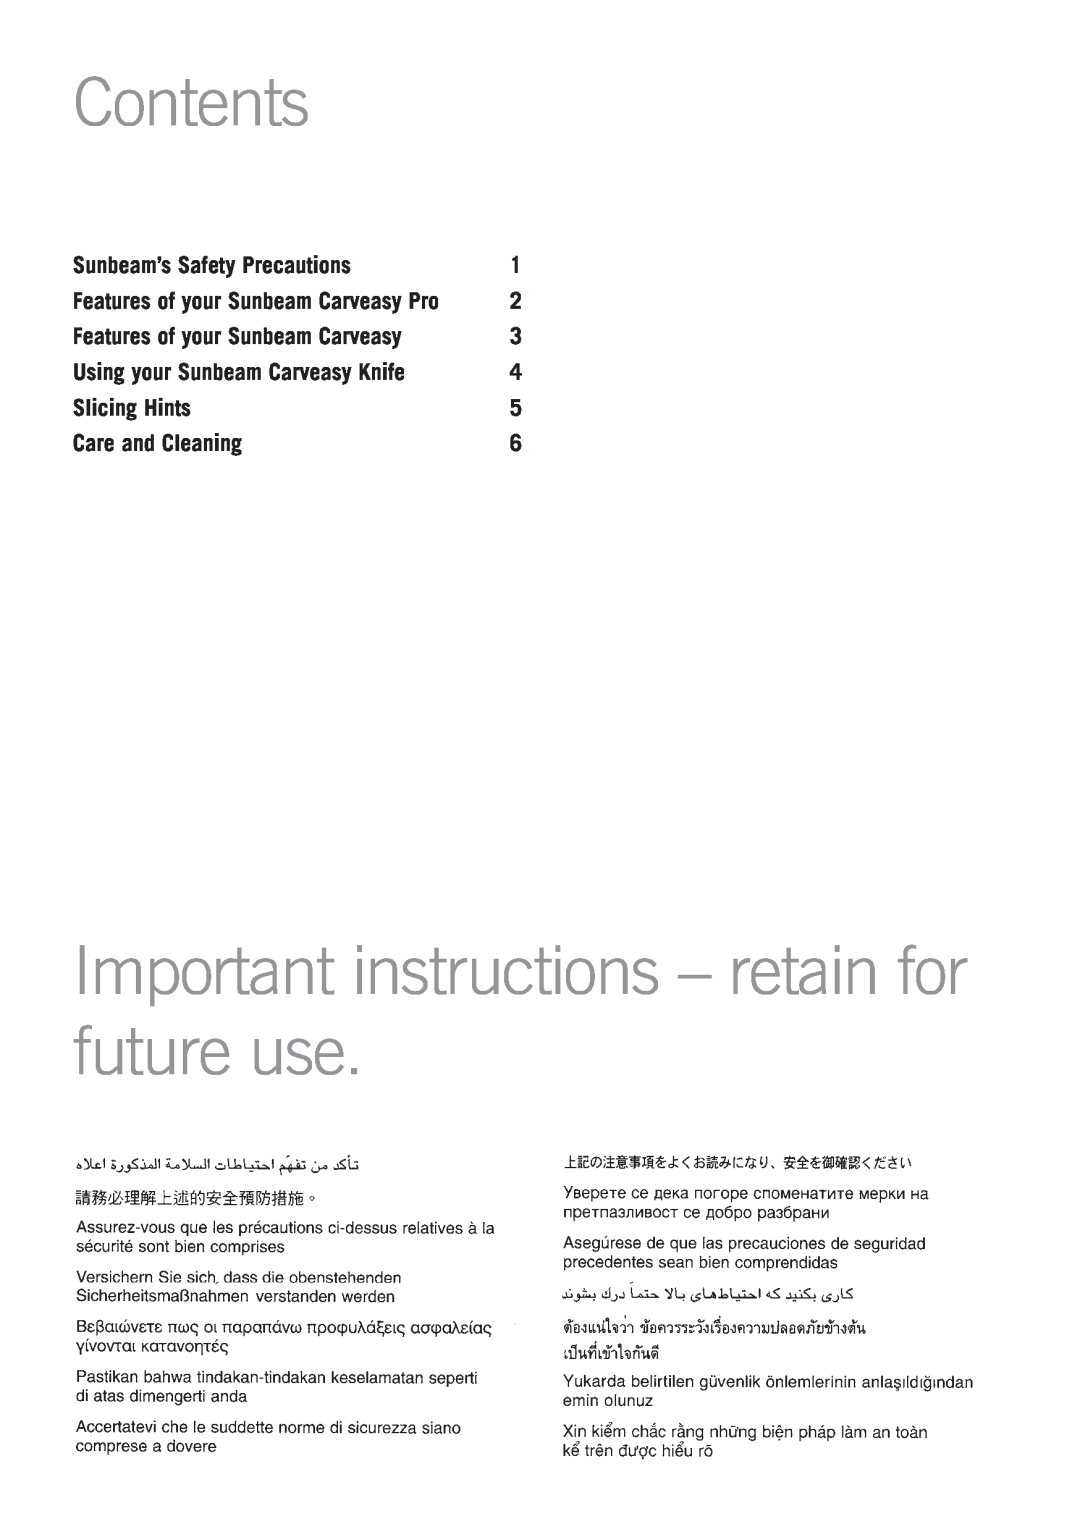 Sunbeam EK3800 manual Contents, Important instructions - retain for future use, Sunbeam’s Safety Precautions, Slicing Hints 